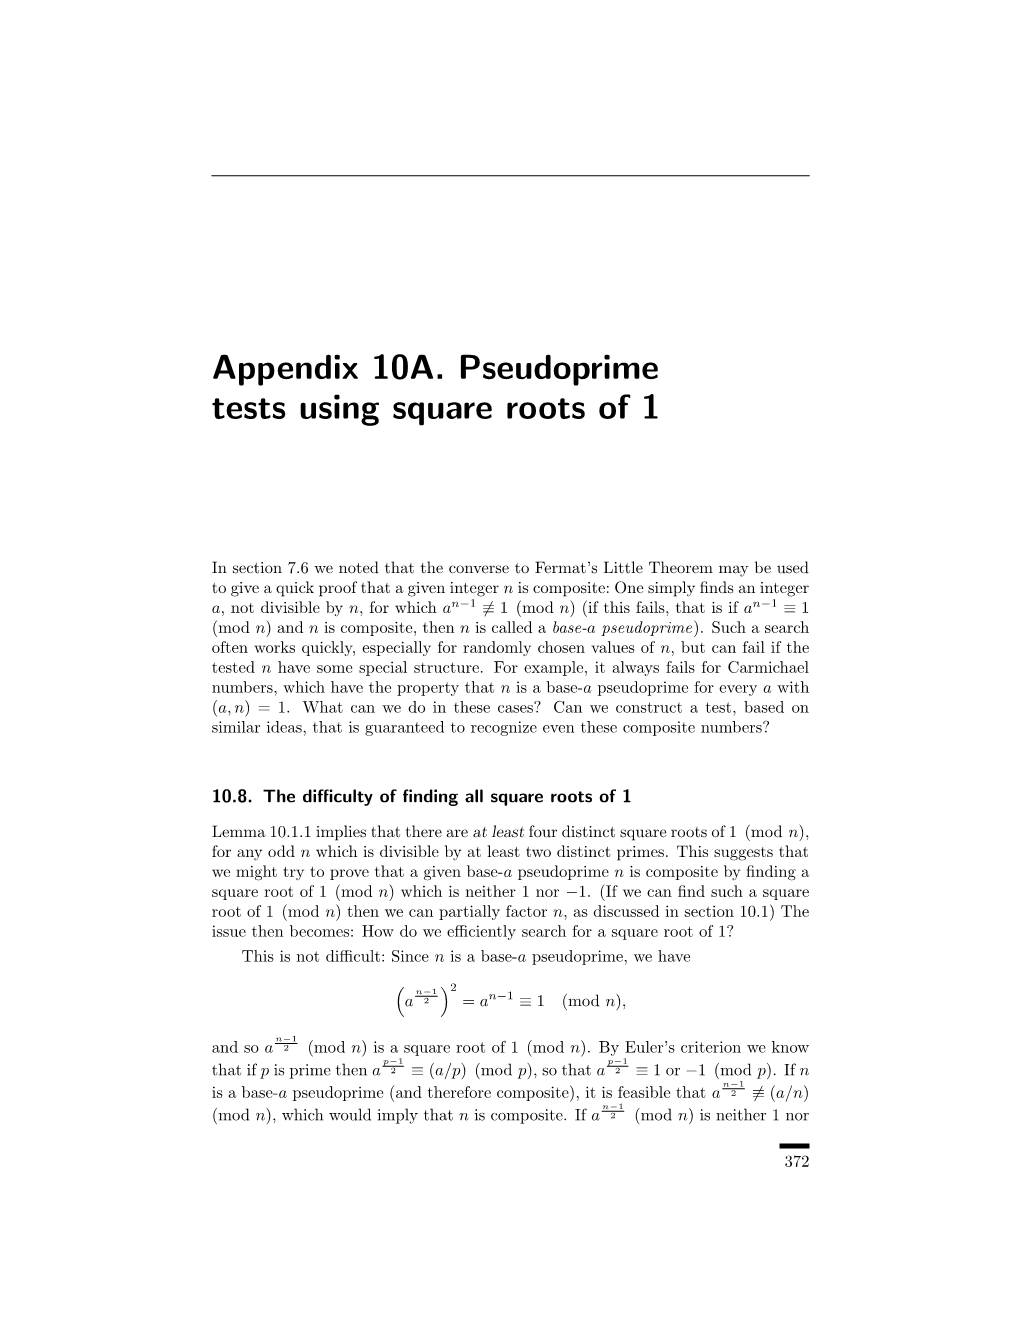 Appendix 10A. Pseudoprime Tests Using Square Roots of 1